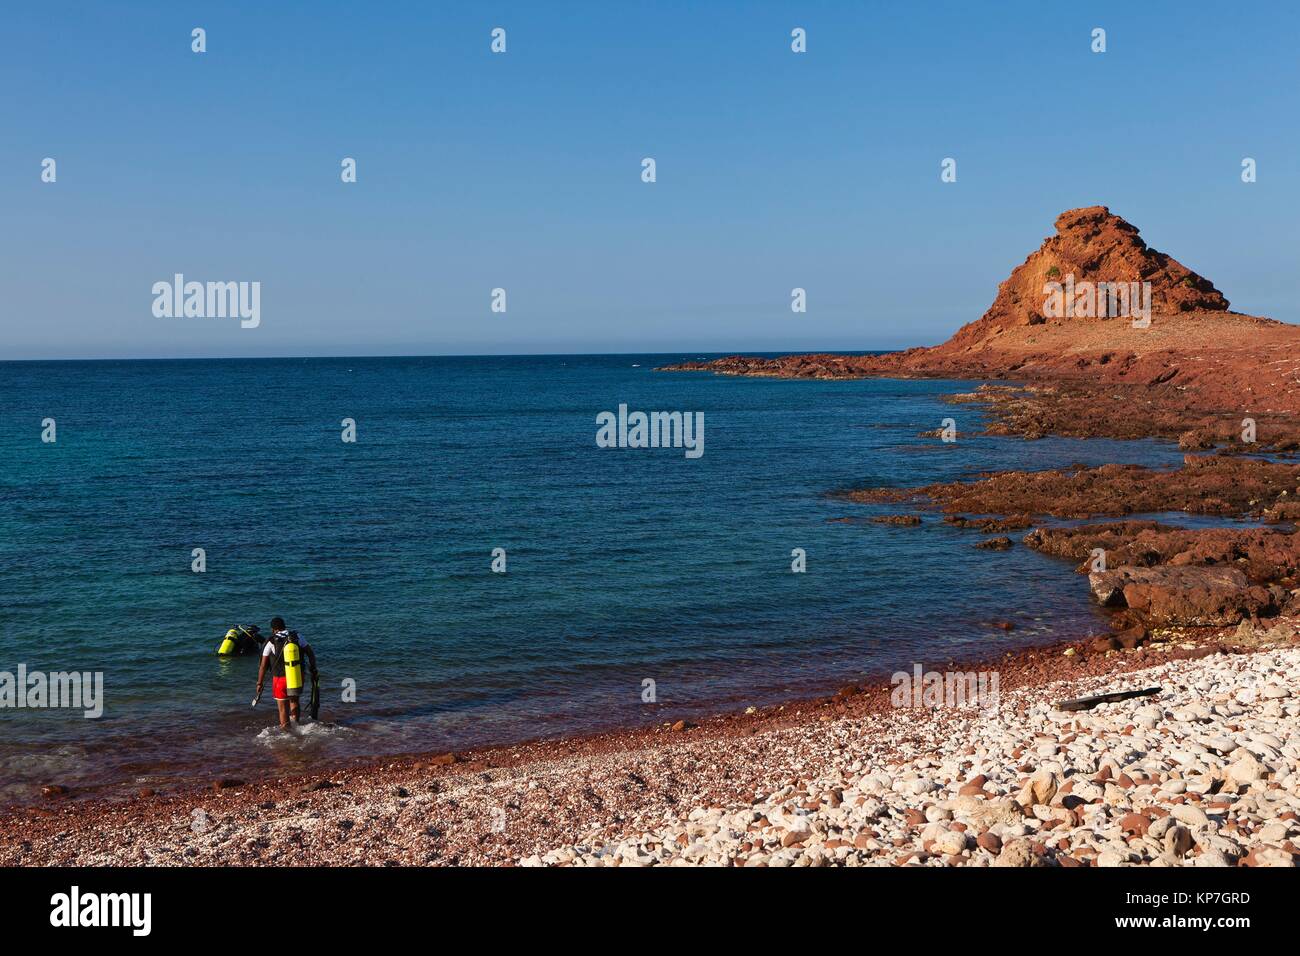 Scuba divers, Ras Dihamri Marine Reserve, Socotra island, listed as World Heritage by UNESCO, Aden Governorate, Yemen, Arabia, West Asia. Stock Photo